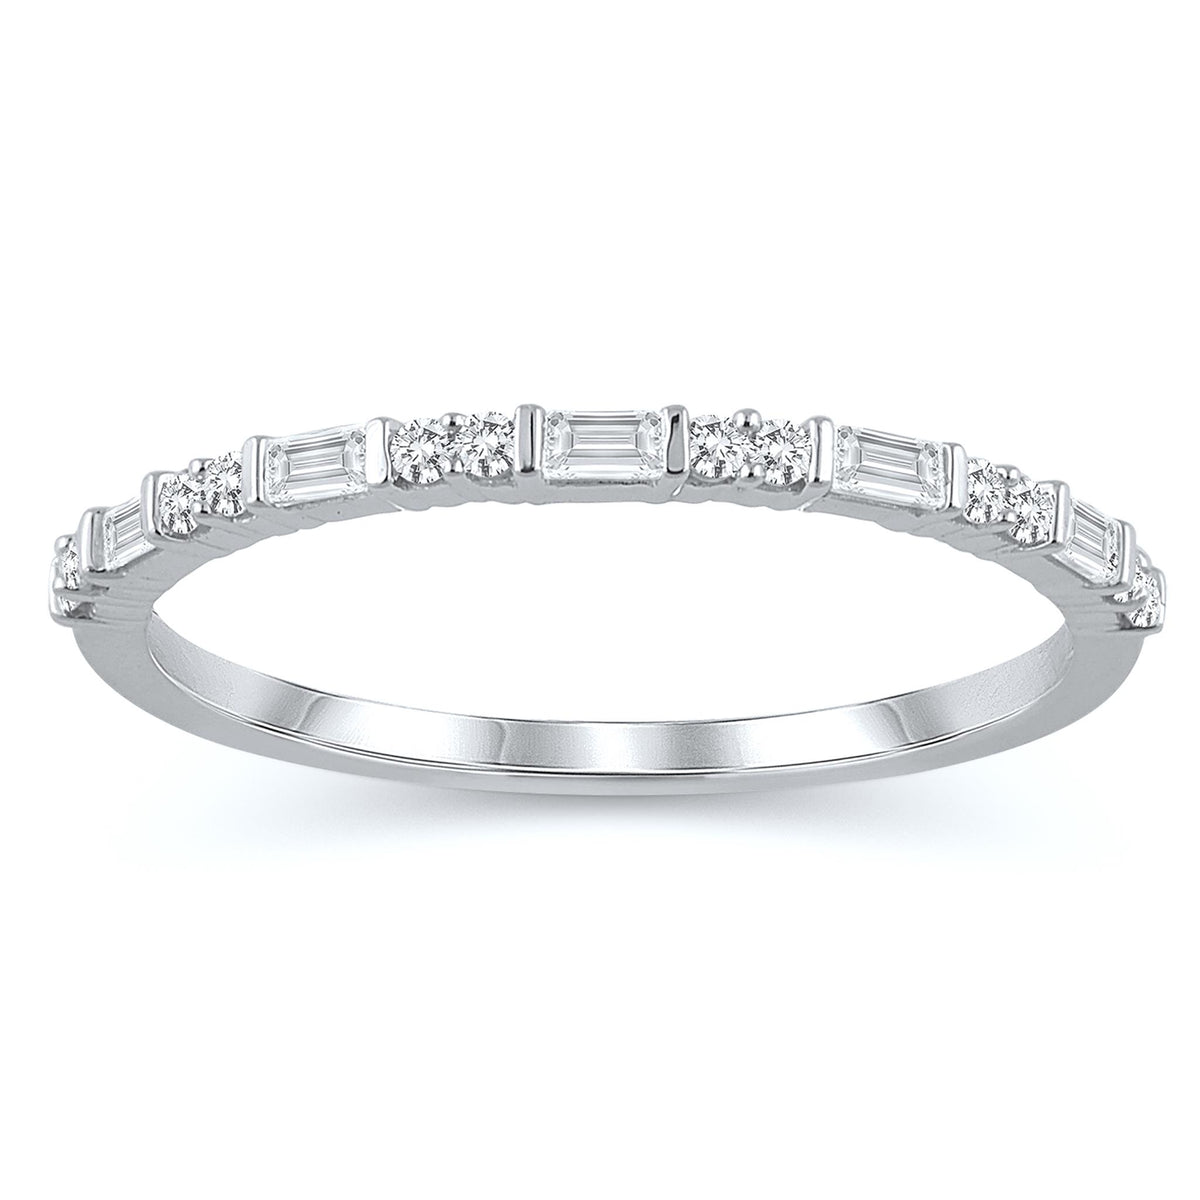 14Kt White Gold Stackable Wedding Ring With 0.20cttw Natural Diamonds